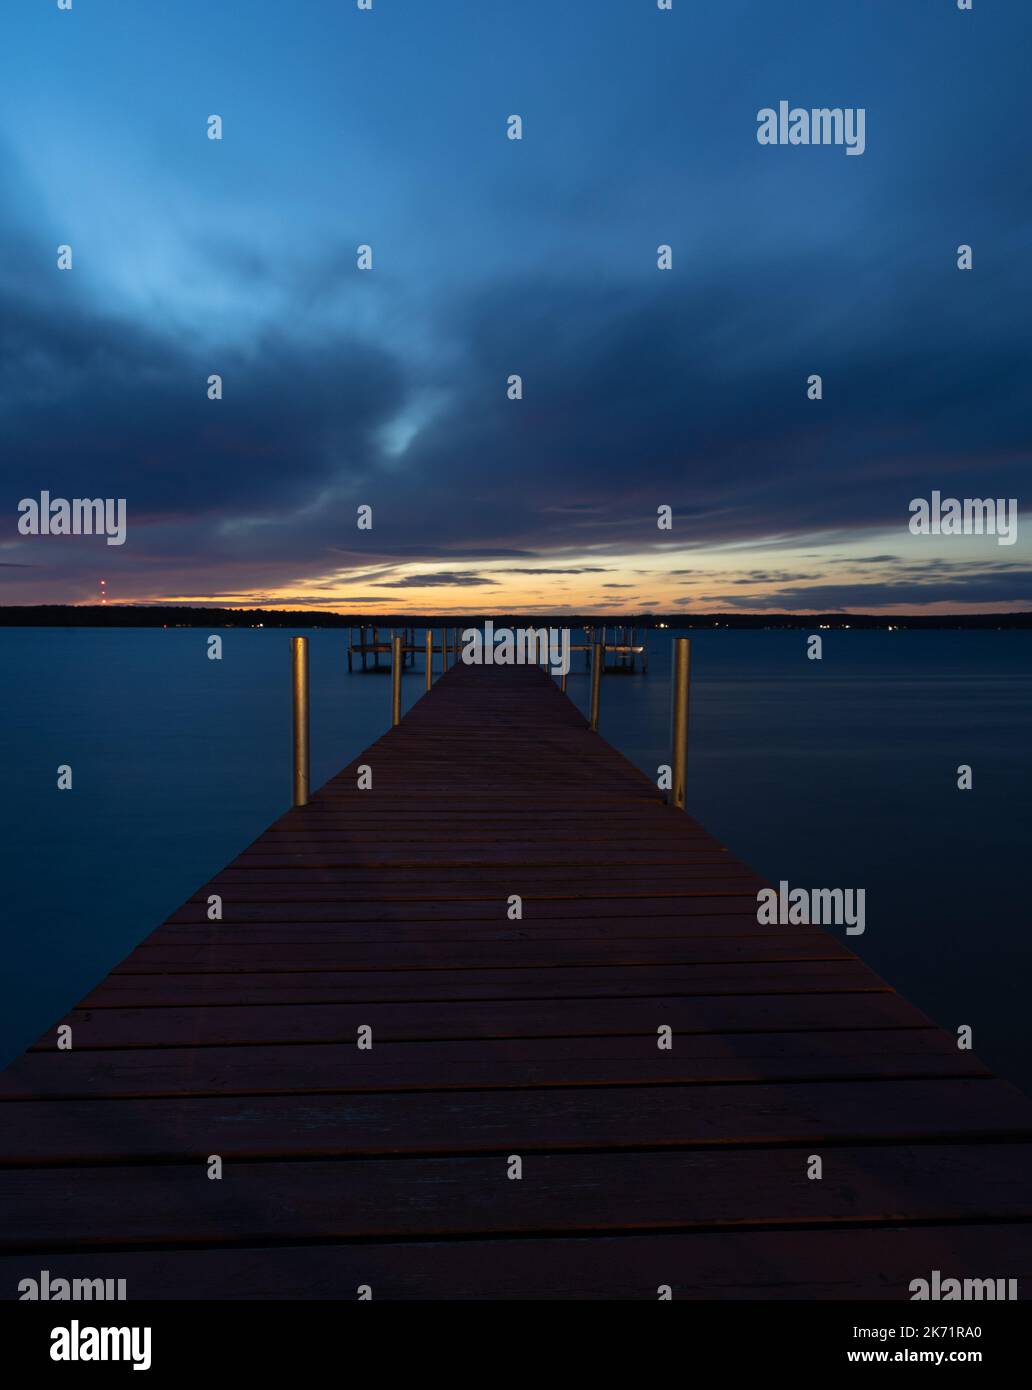 Dock leading out into a lake at sunset Stock Photo